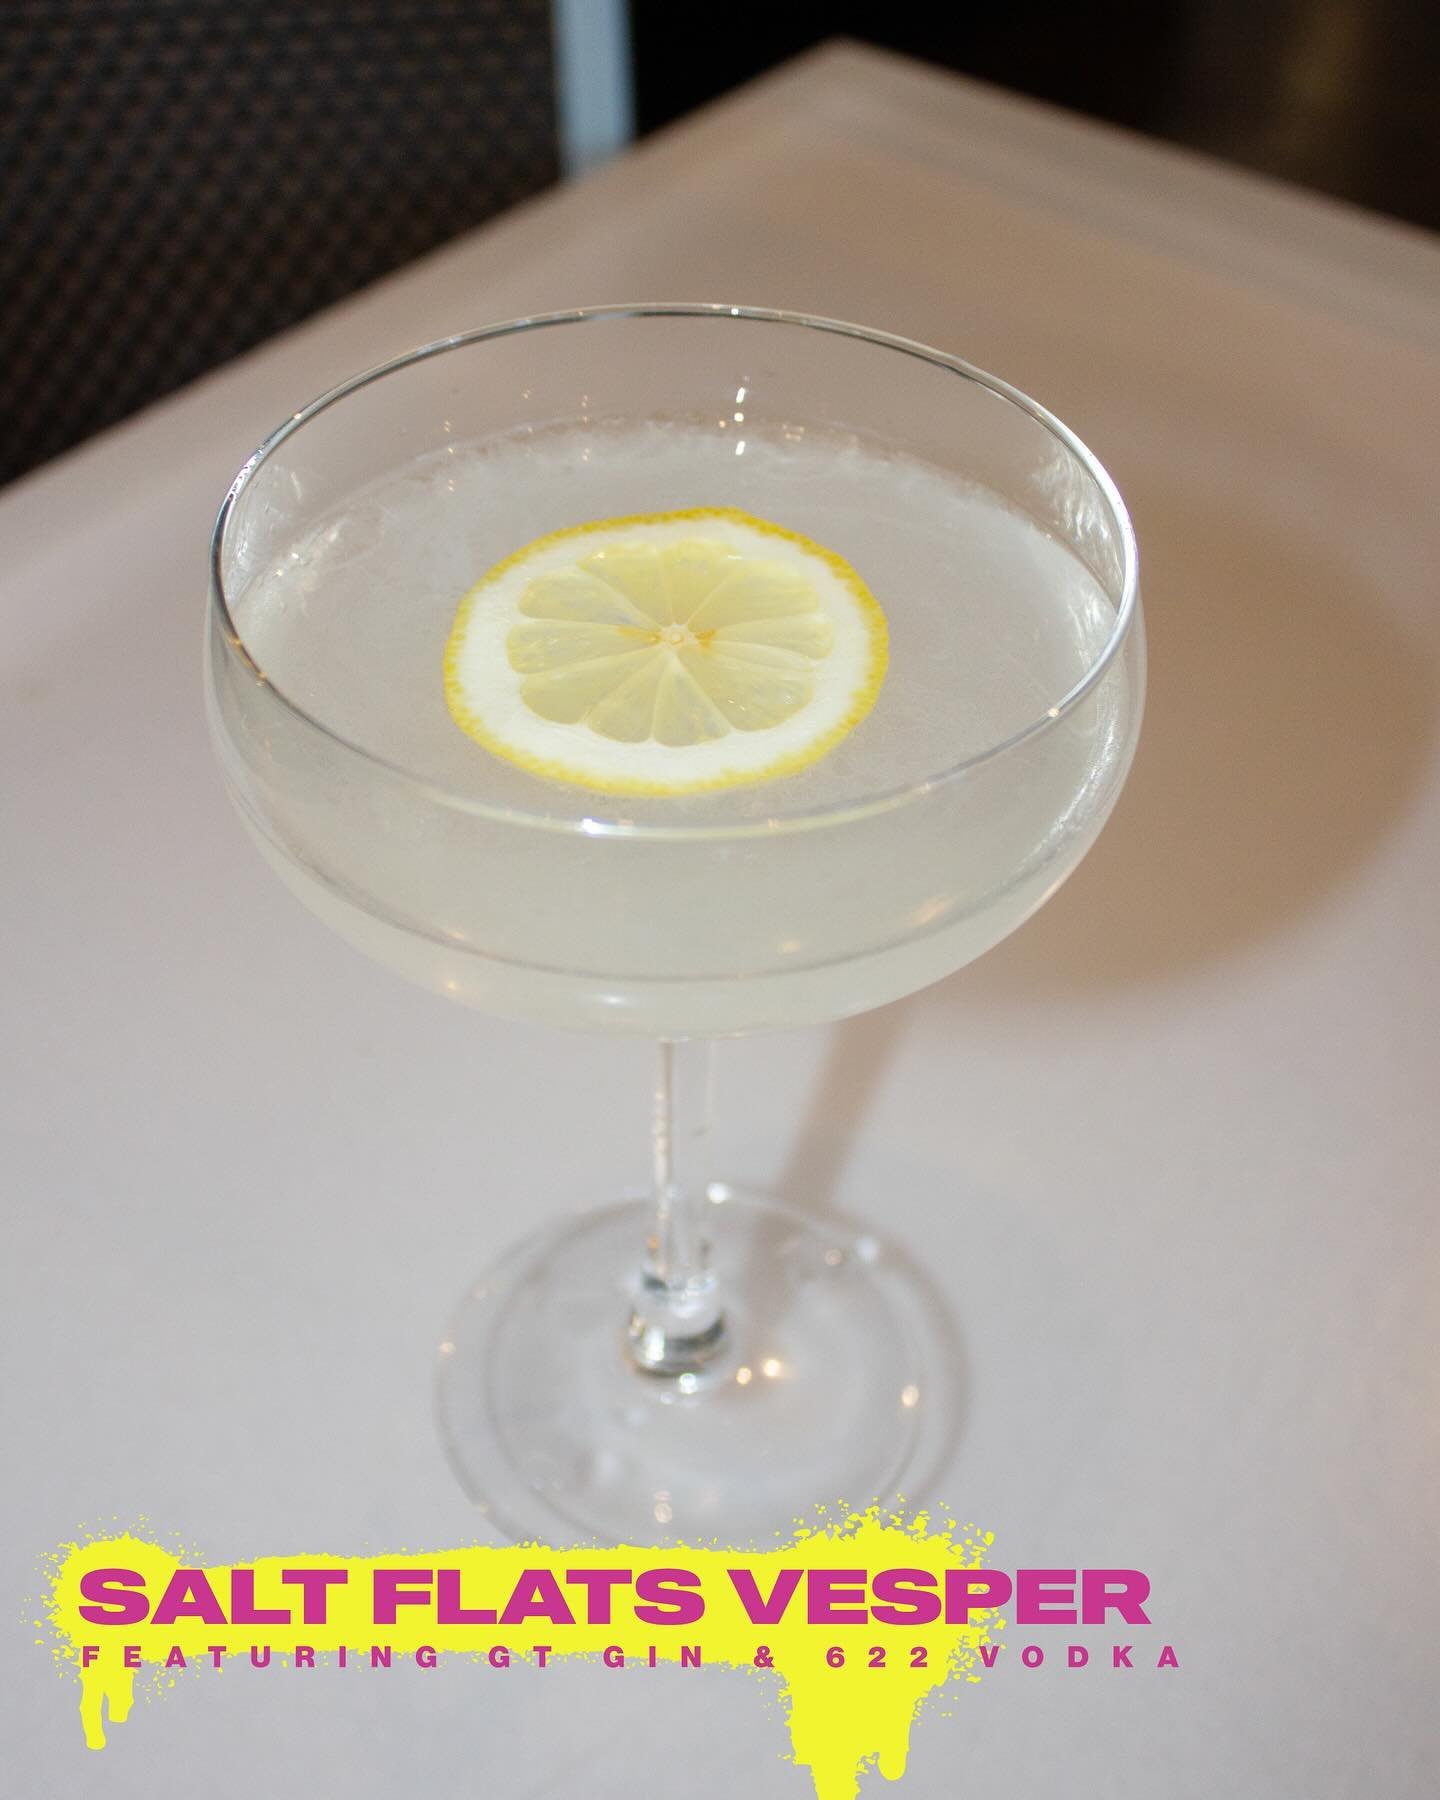 If you can&rsquo;t decide whether you love Gin or Vodka more, then the Salt Flats Vesper is perfect for you🍸 This cocktail brings together both spirits in an incredibly simple, classic drink✨
.
.
.
.
#saltflatsspirits #saltflatsdistillery #yum #vodk